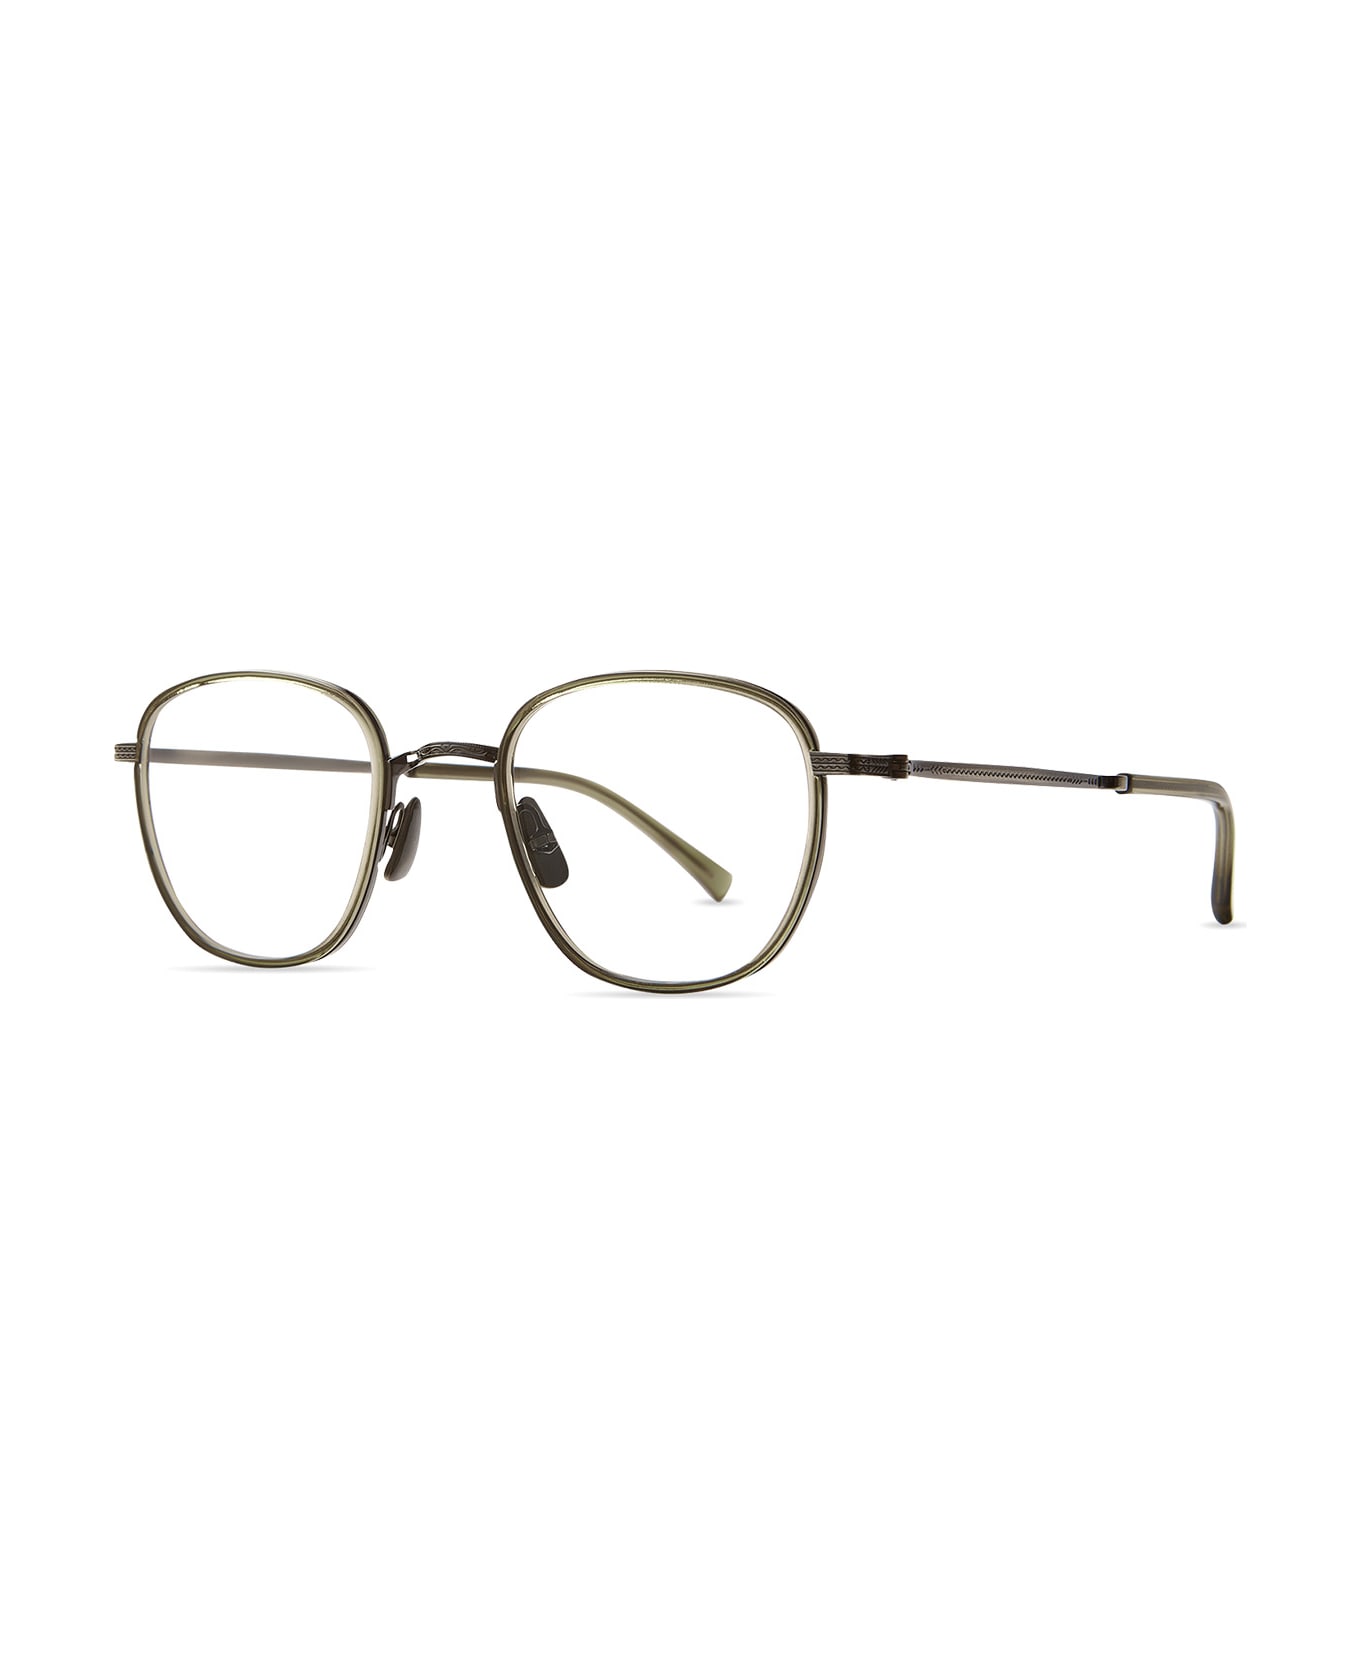 Mr. Leight Griffith Ii C Limu-pewter Glasses - Limu-Pewter